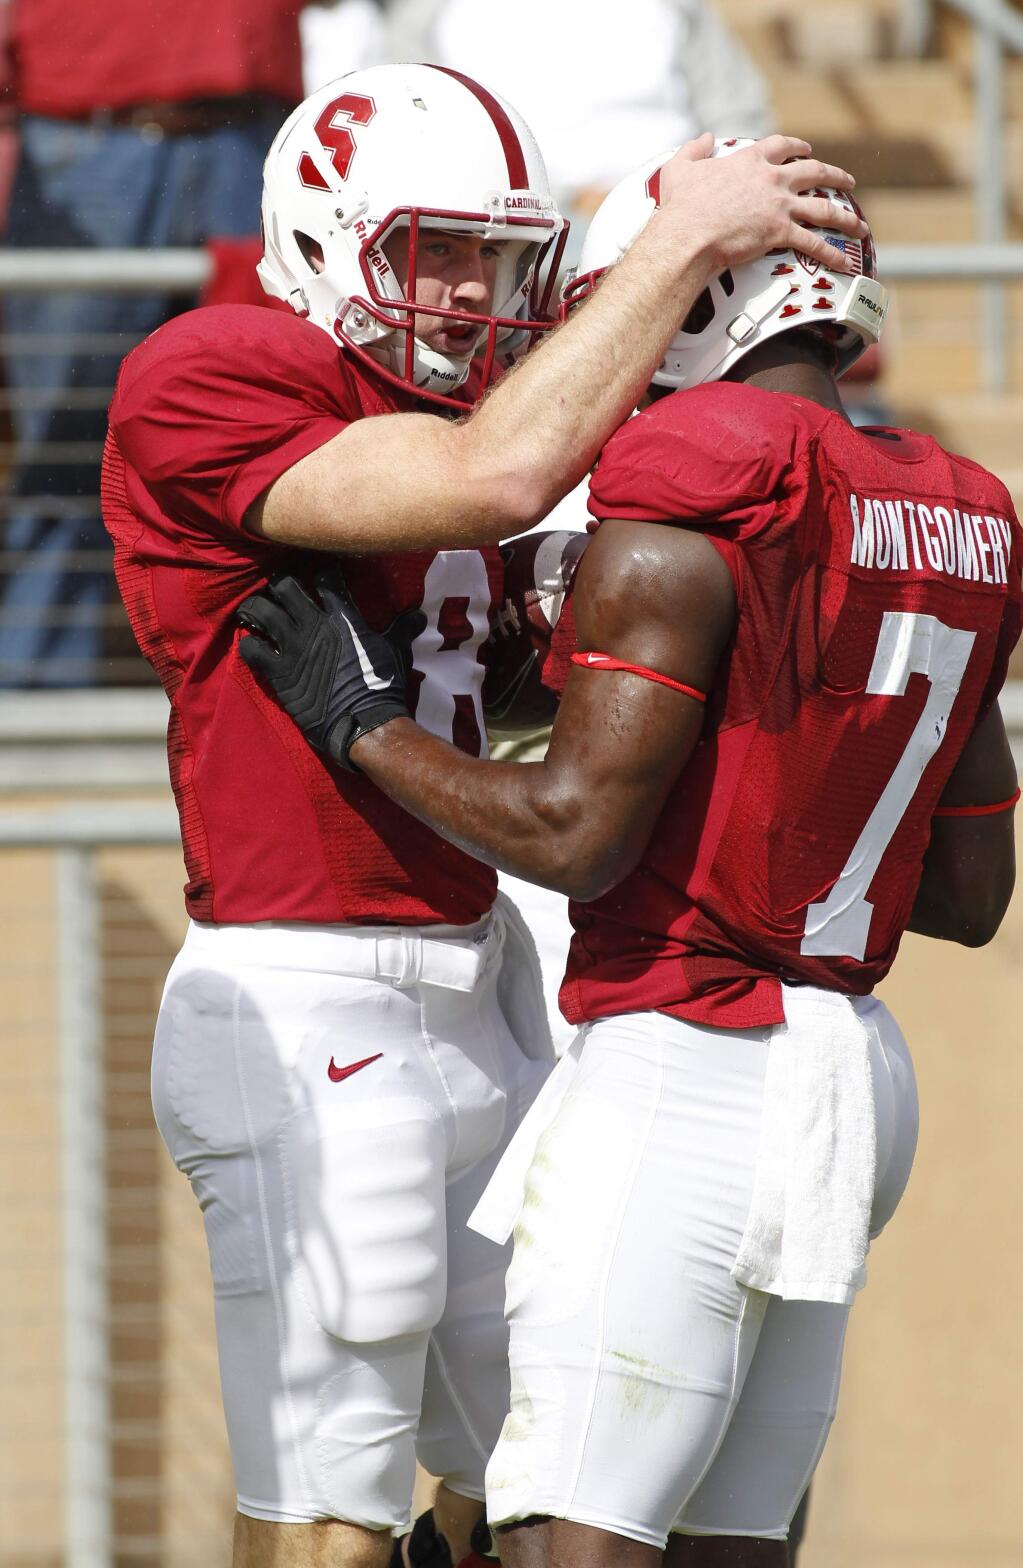 Stanford quarterback Kevin Hogan, left, celebrates with Ty Montgomery after scoring a touchdown against Oregon State during the first half of an NCAA college football game, Saturday, Oct. 25, 2014, in Stanford. (AP Photo/George Nikitin)